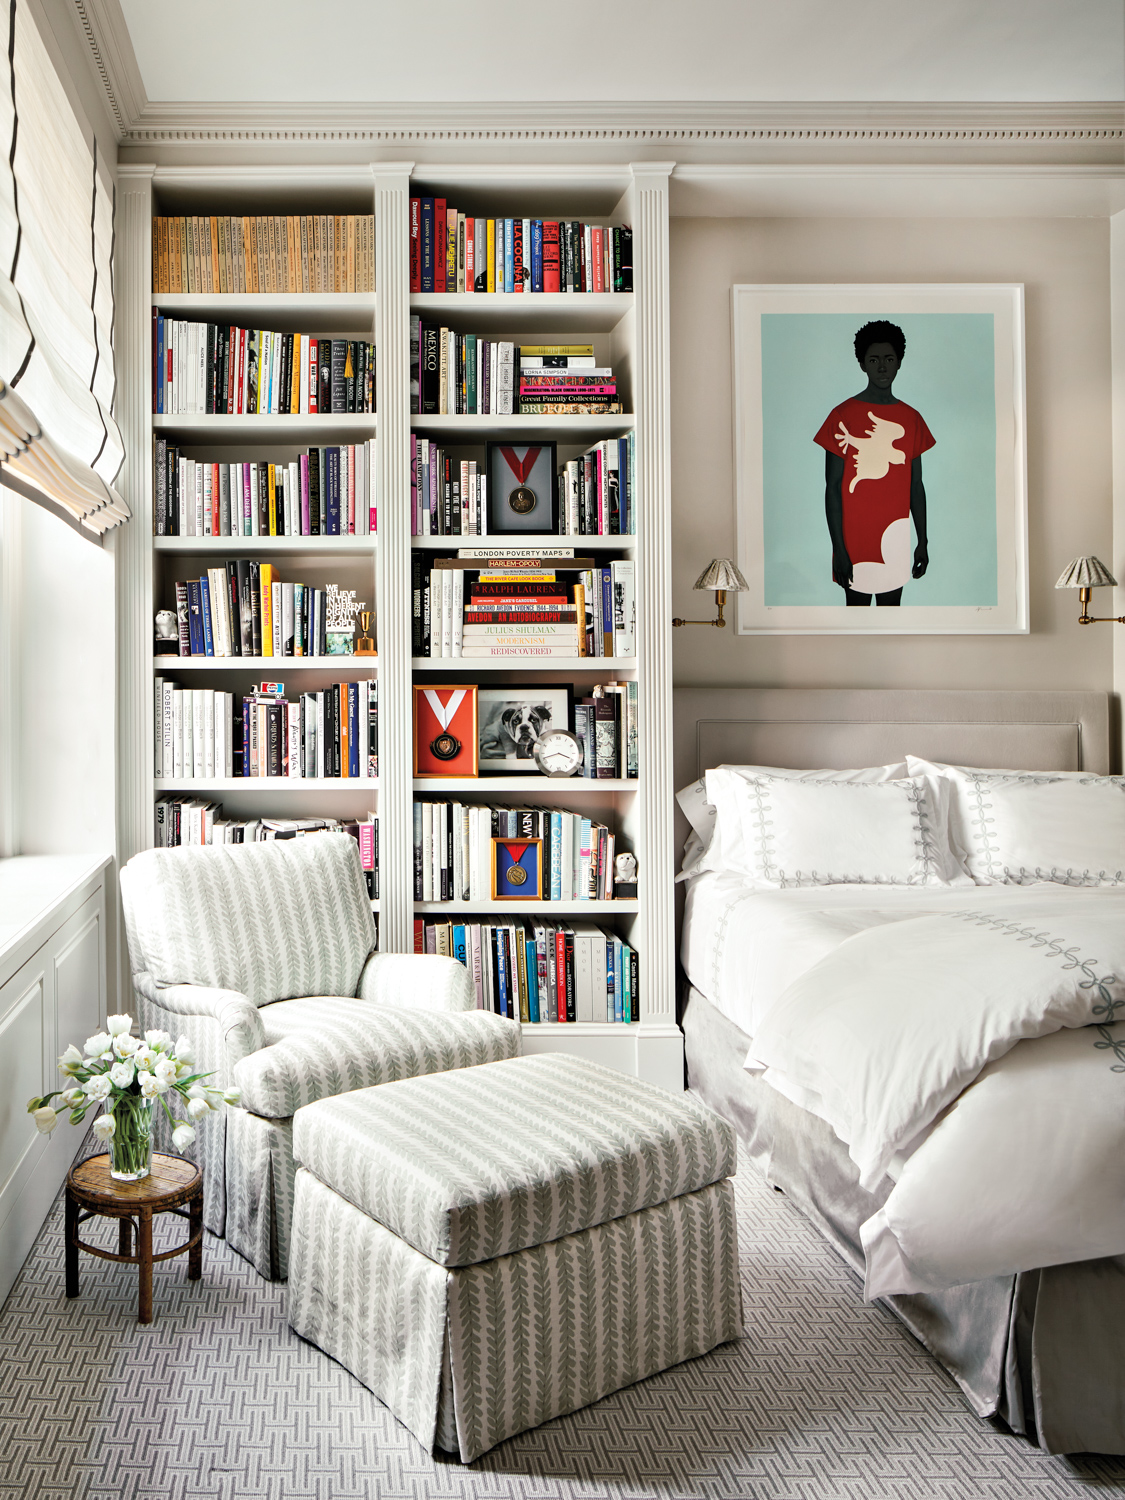 Bedroom with bookshelves and an...